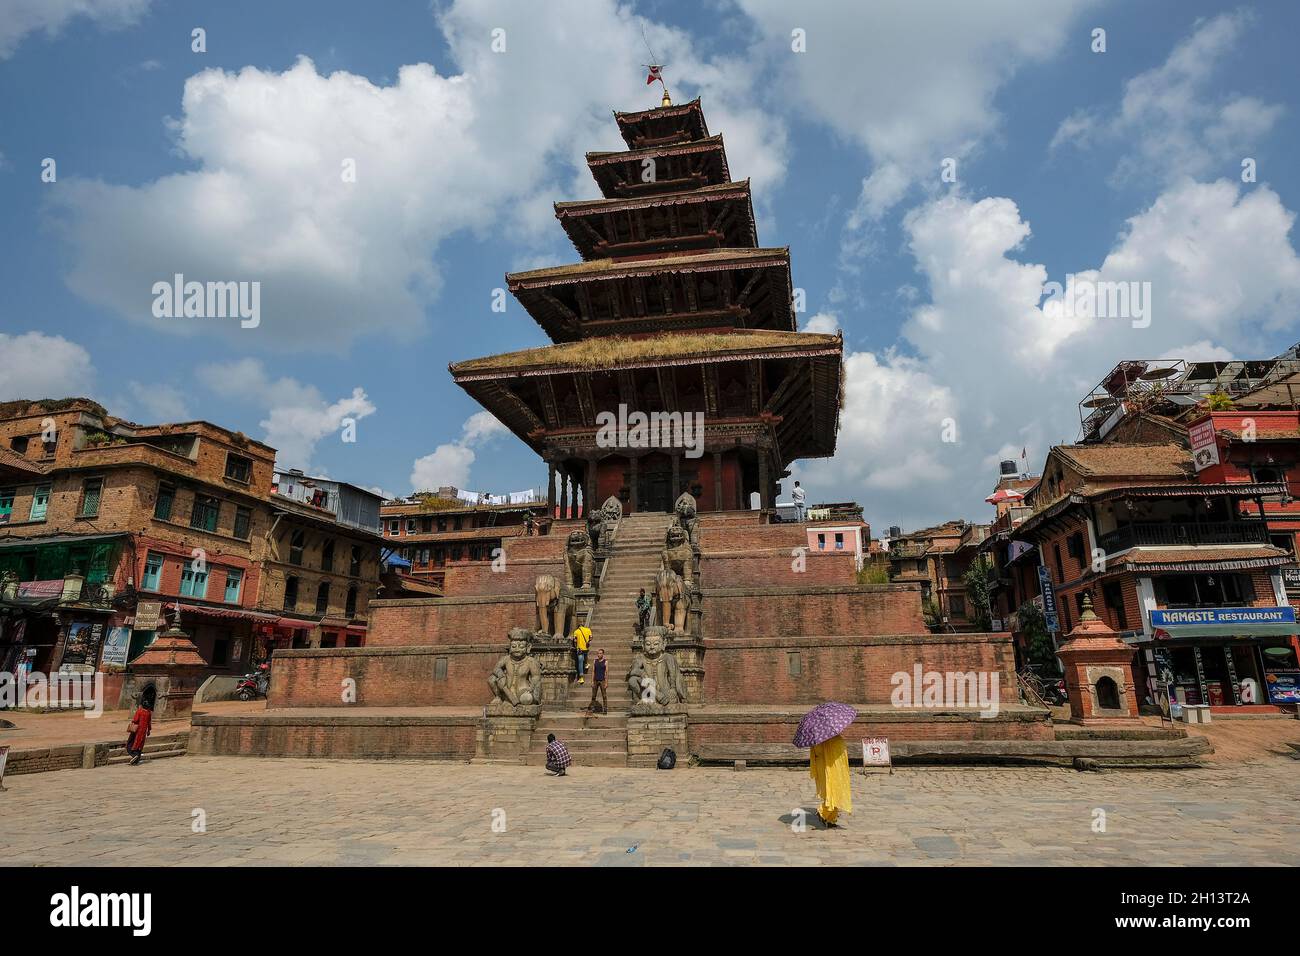 Bhaktapur, Nepal - October 2021: Nyatapola Temple is a Hindu temple built in Pagoda Style in Taumadhi Square in Bhaktapur on October 10, 2021 in Kathm Stock Photo